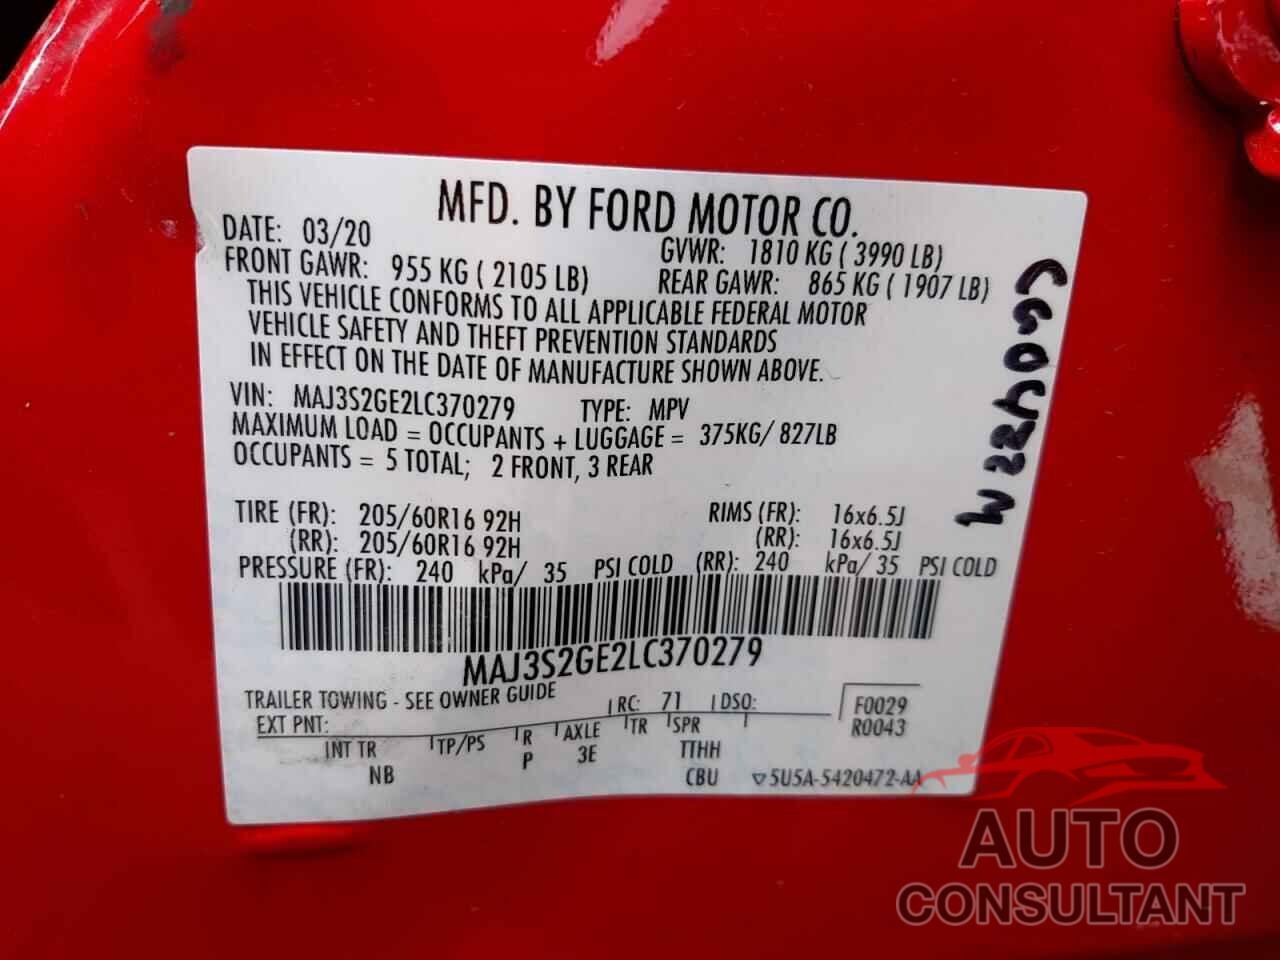 FORD ALL OTHER 2020 - MAJ3S2GE2LC370279